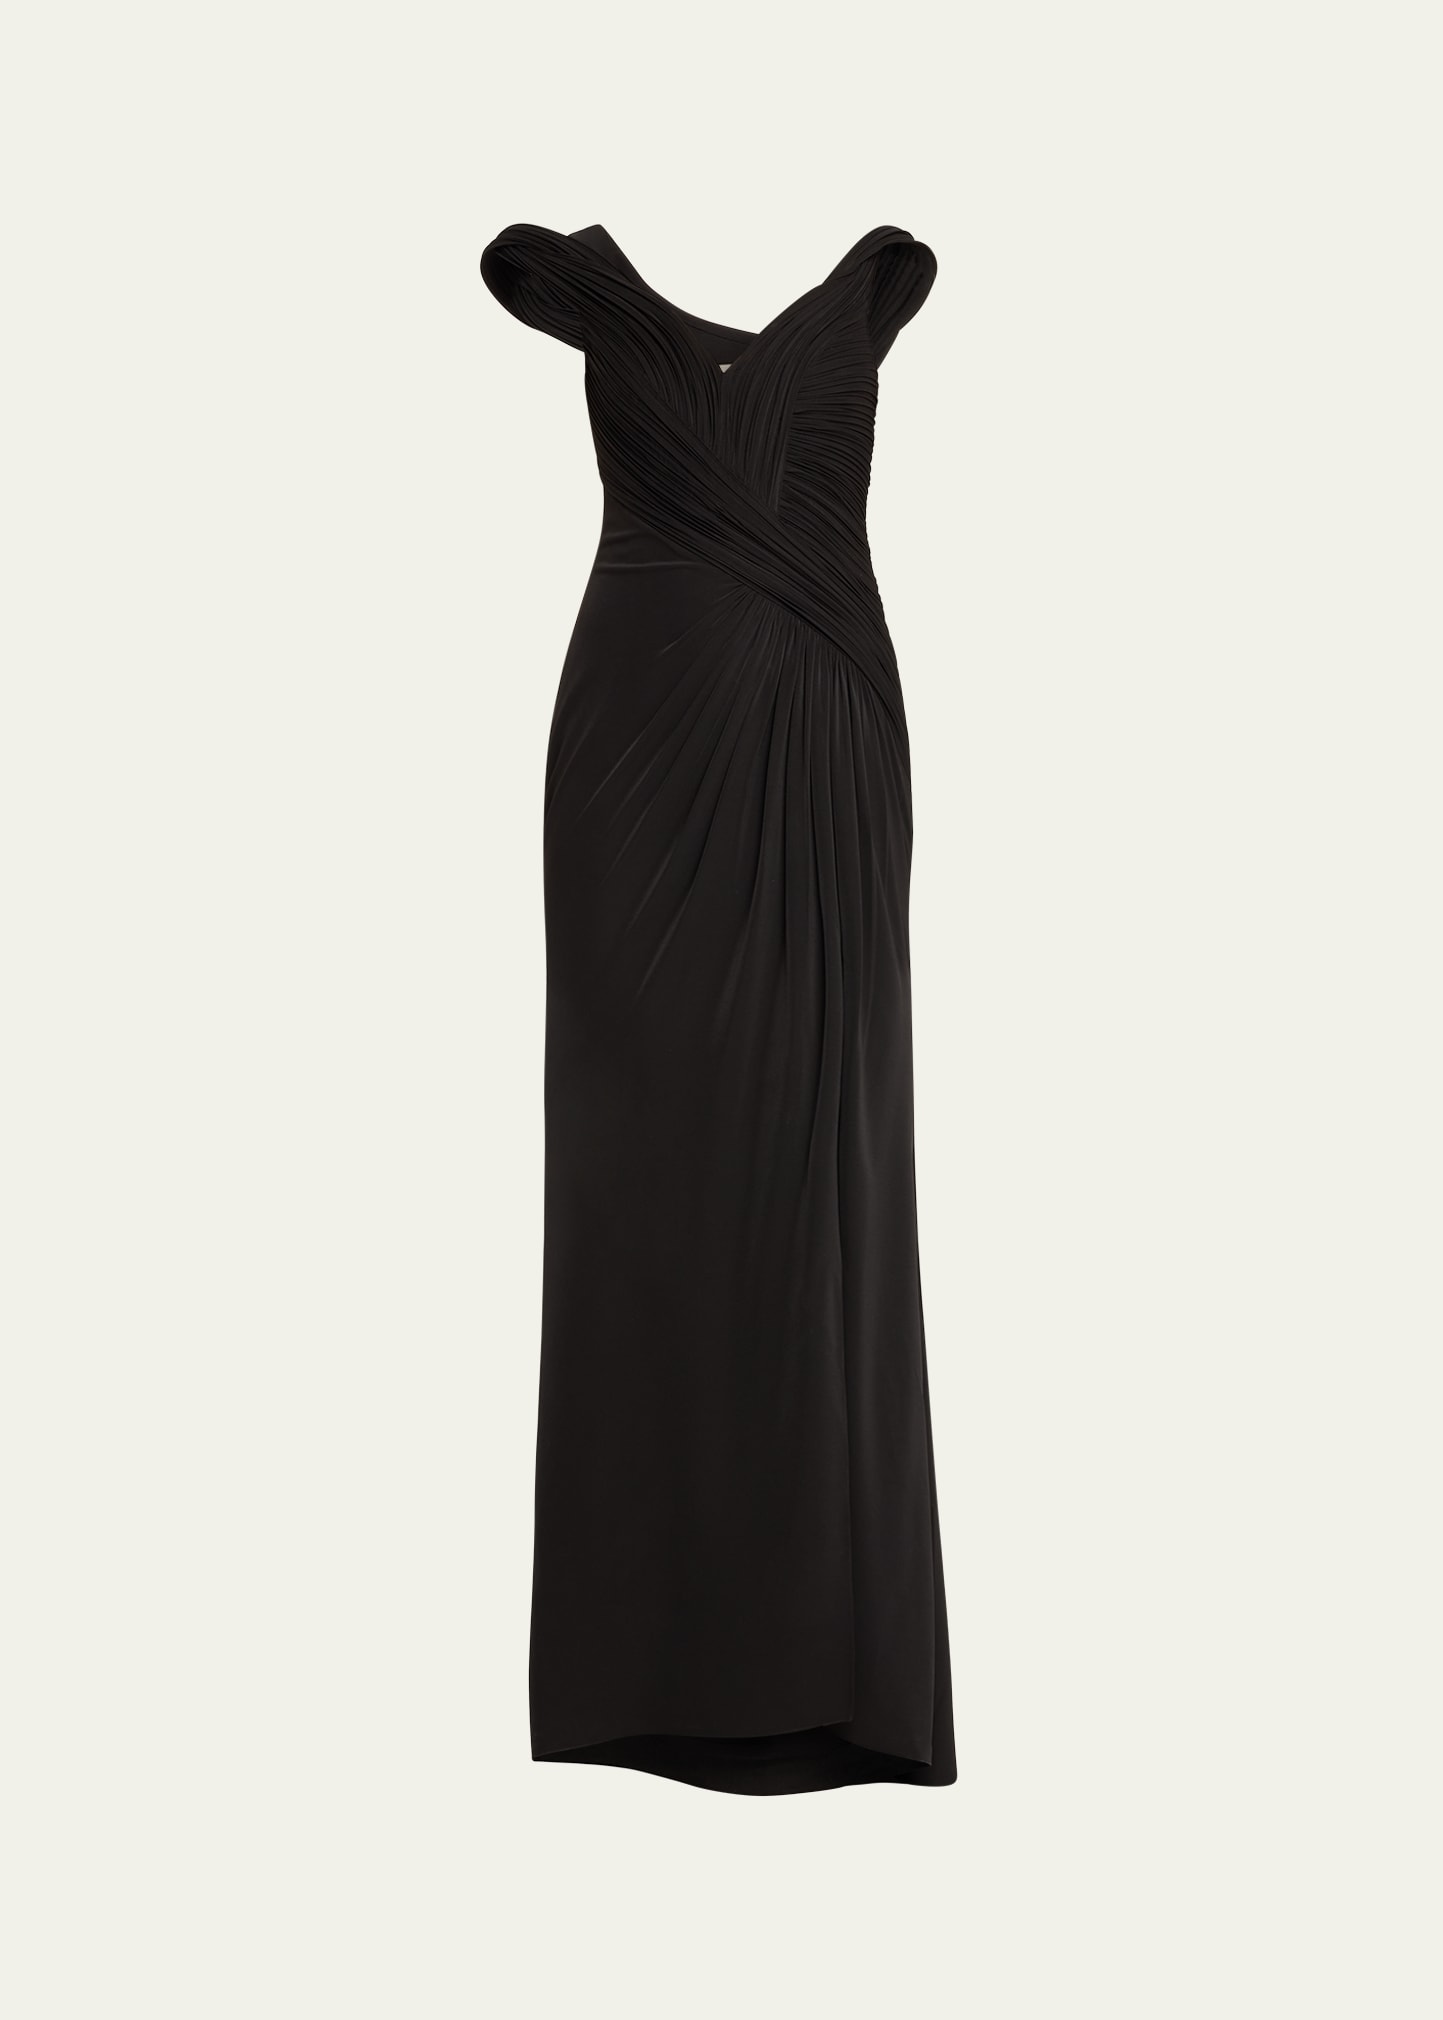 The Pandora Sculpted Draped Gown